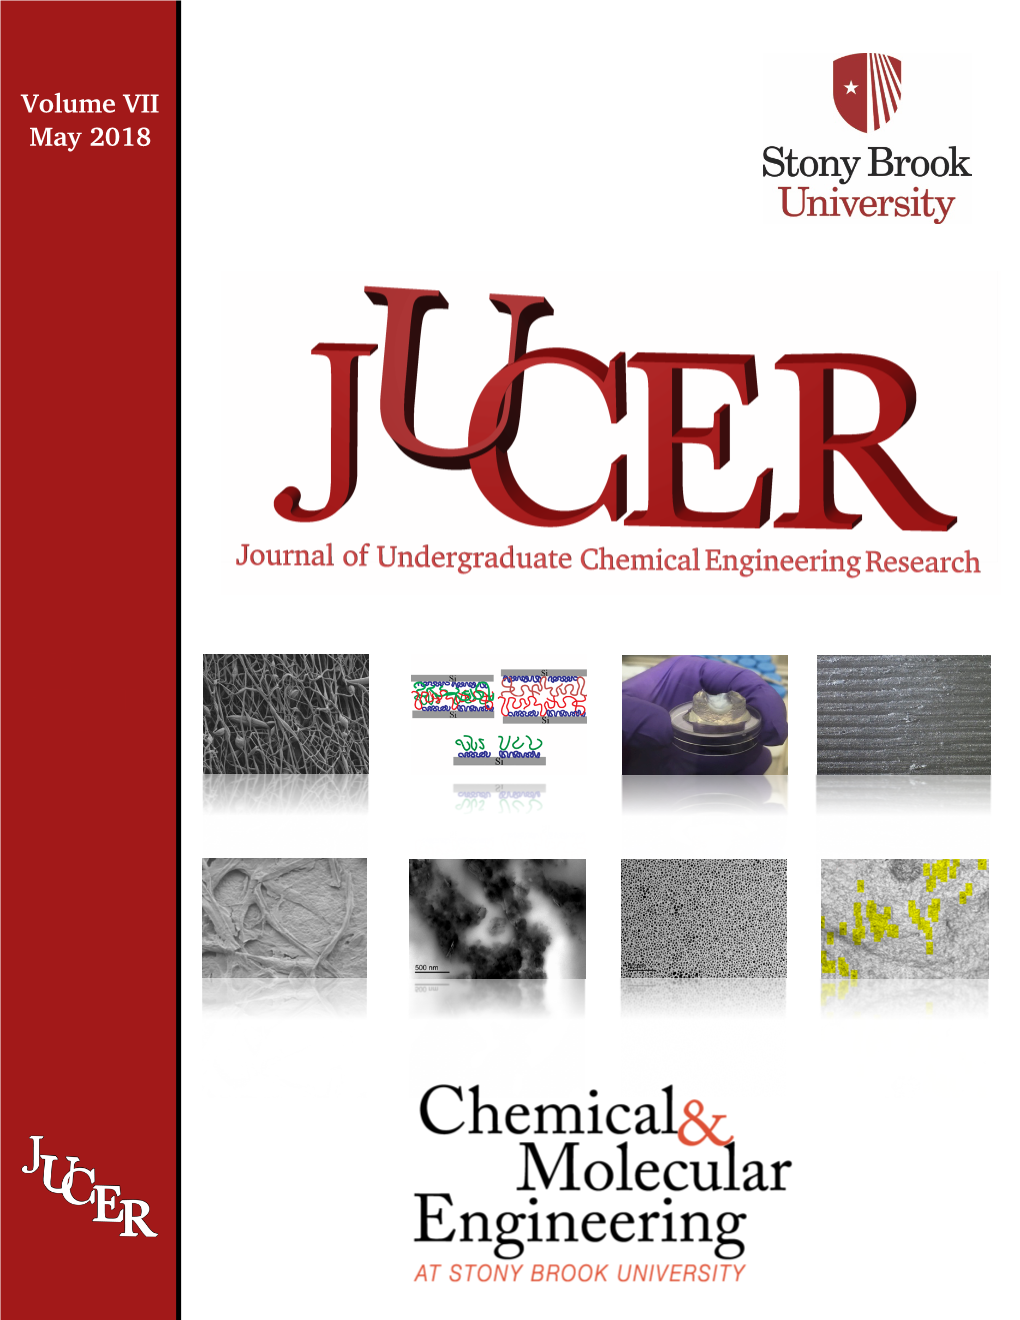 Journal of Undergraduate Chemical Engineering Research (JUCER